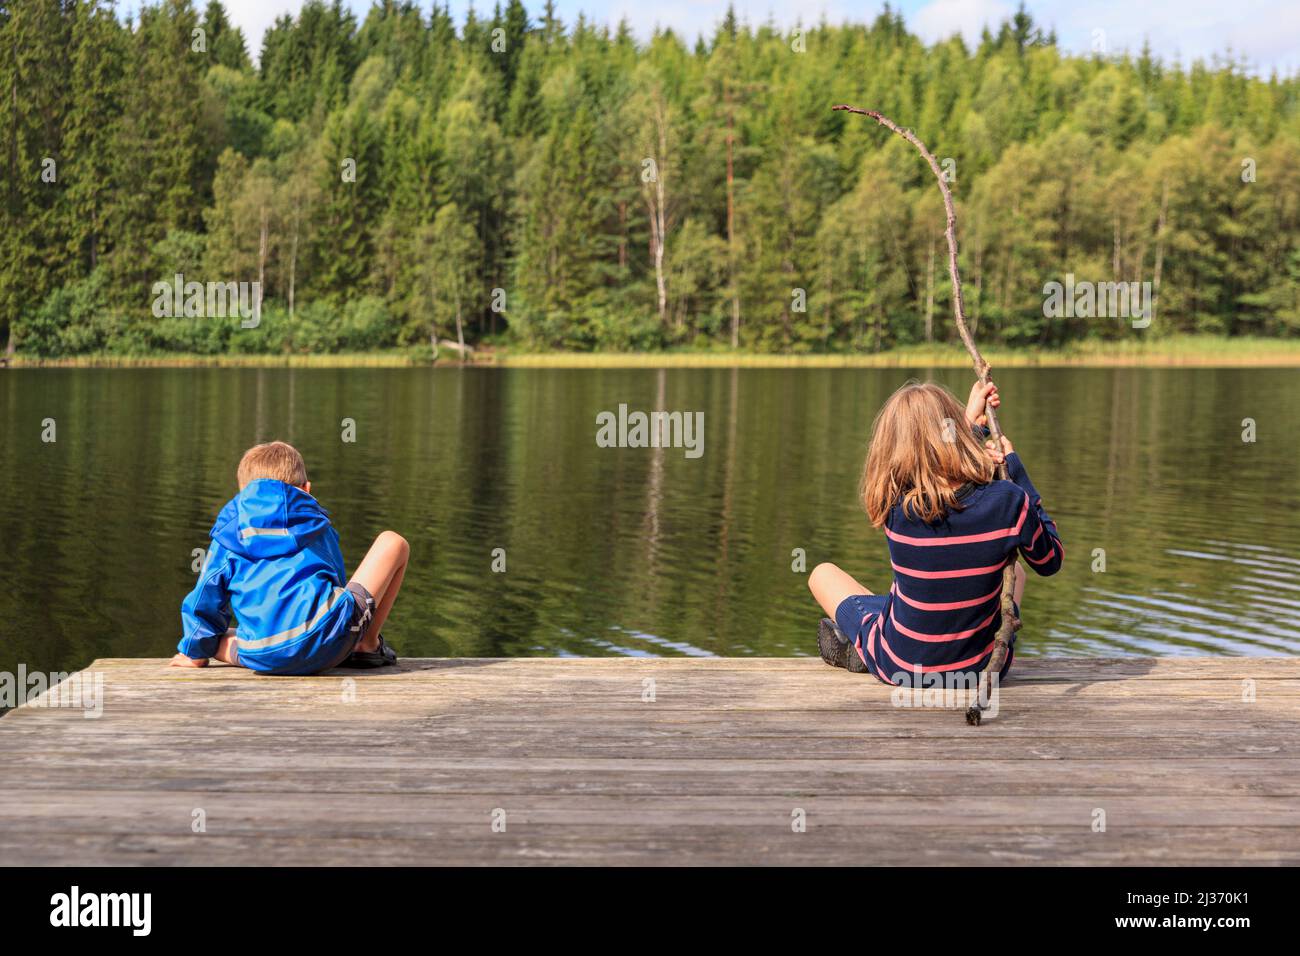 Two children, younger brother and older sister, using a homemade fishing rod fishing from jetty by a lake set in an idyllic Swedish summer forest landscape Stock Photo